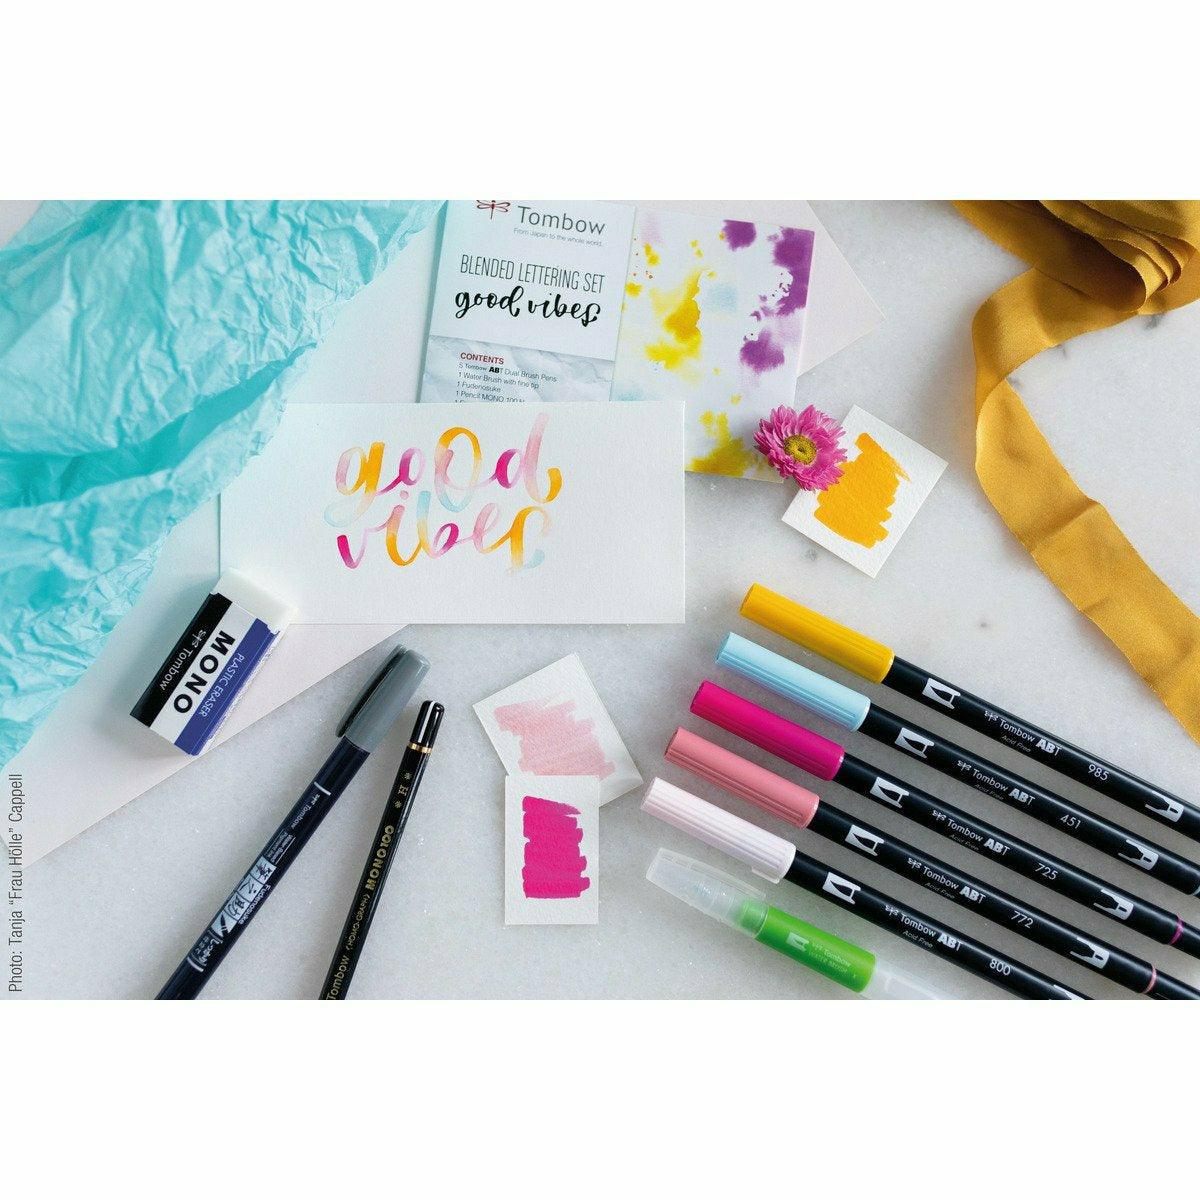 Tombow Blended Lettering Set Good Vies im Outlet Sale